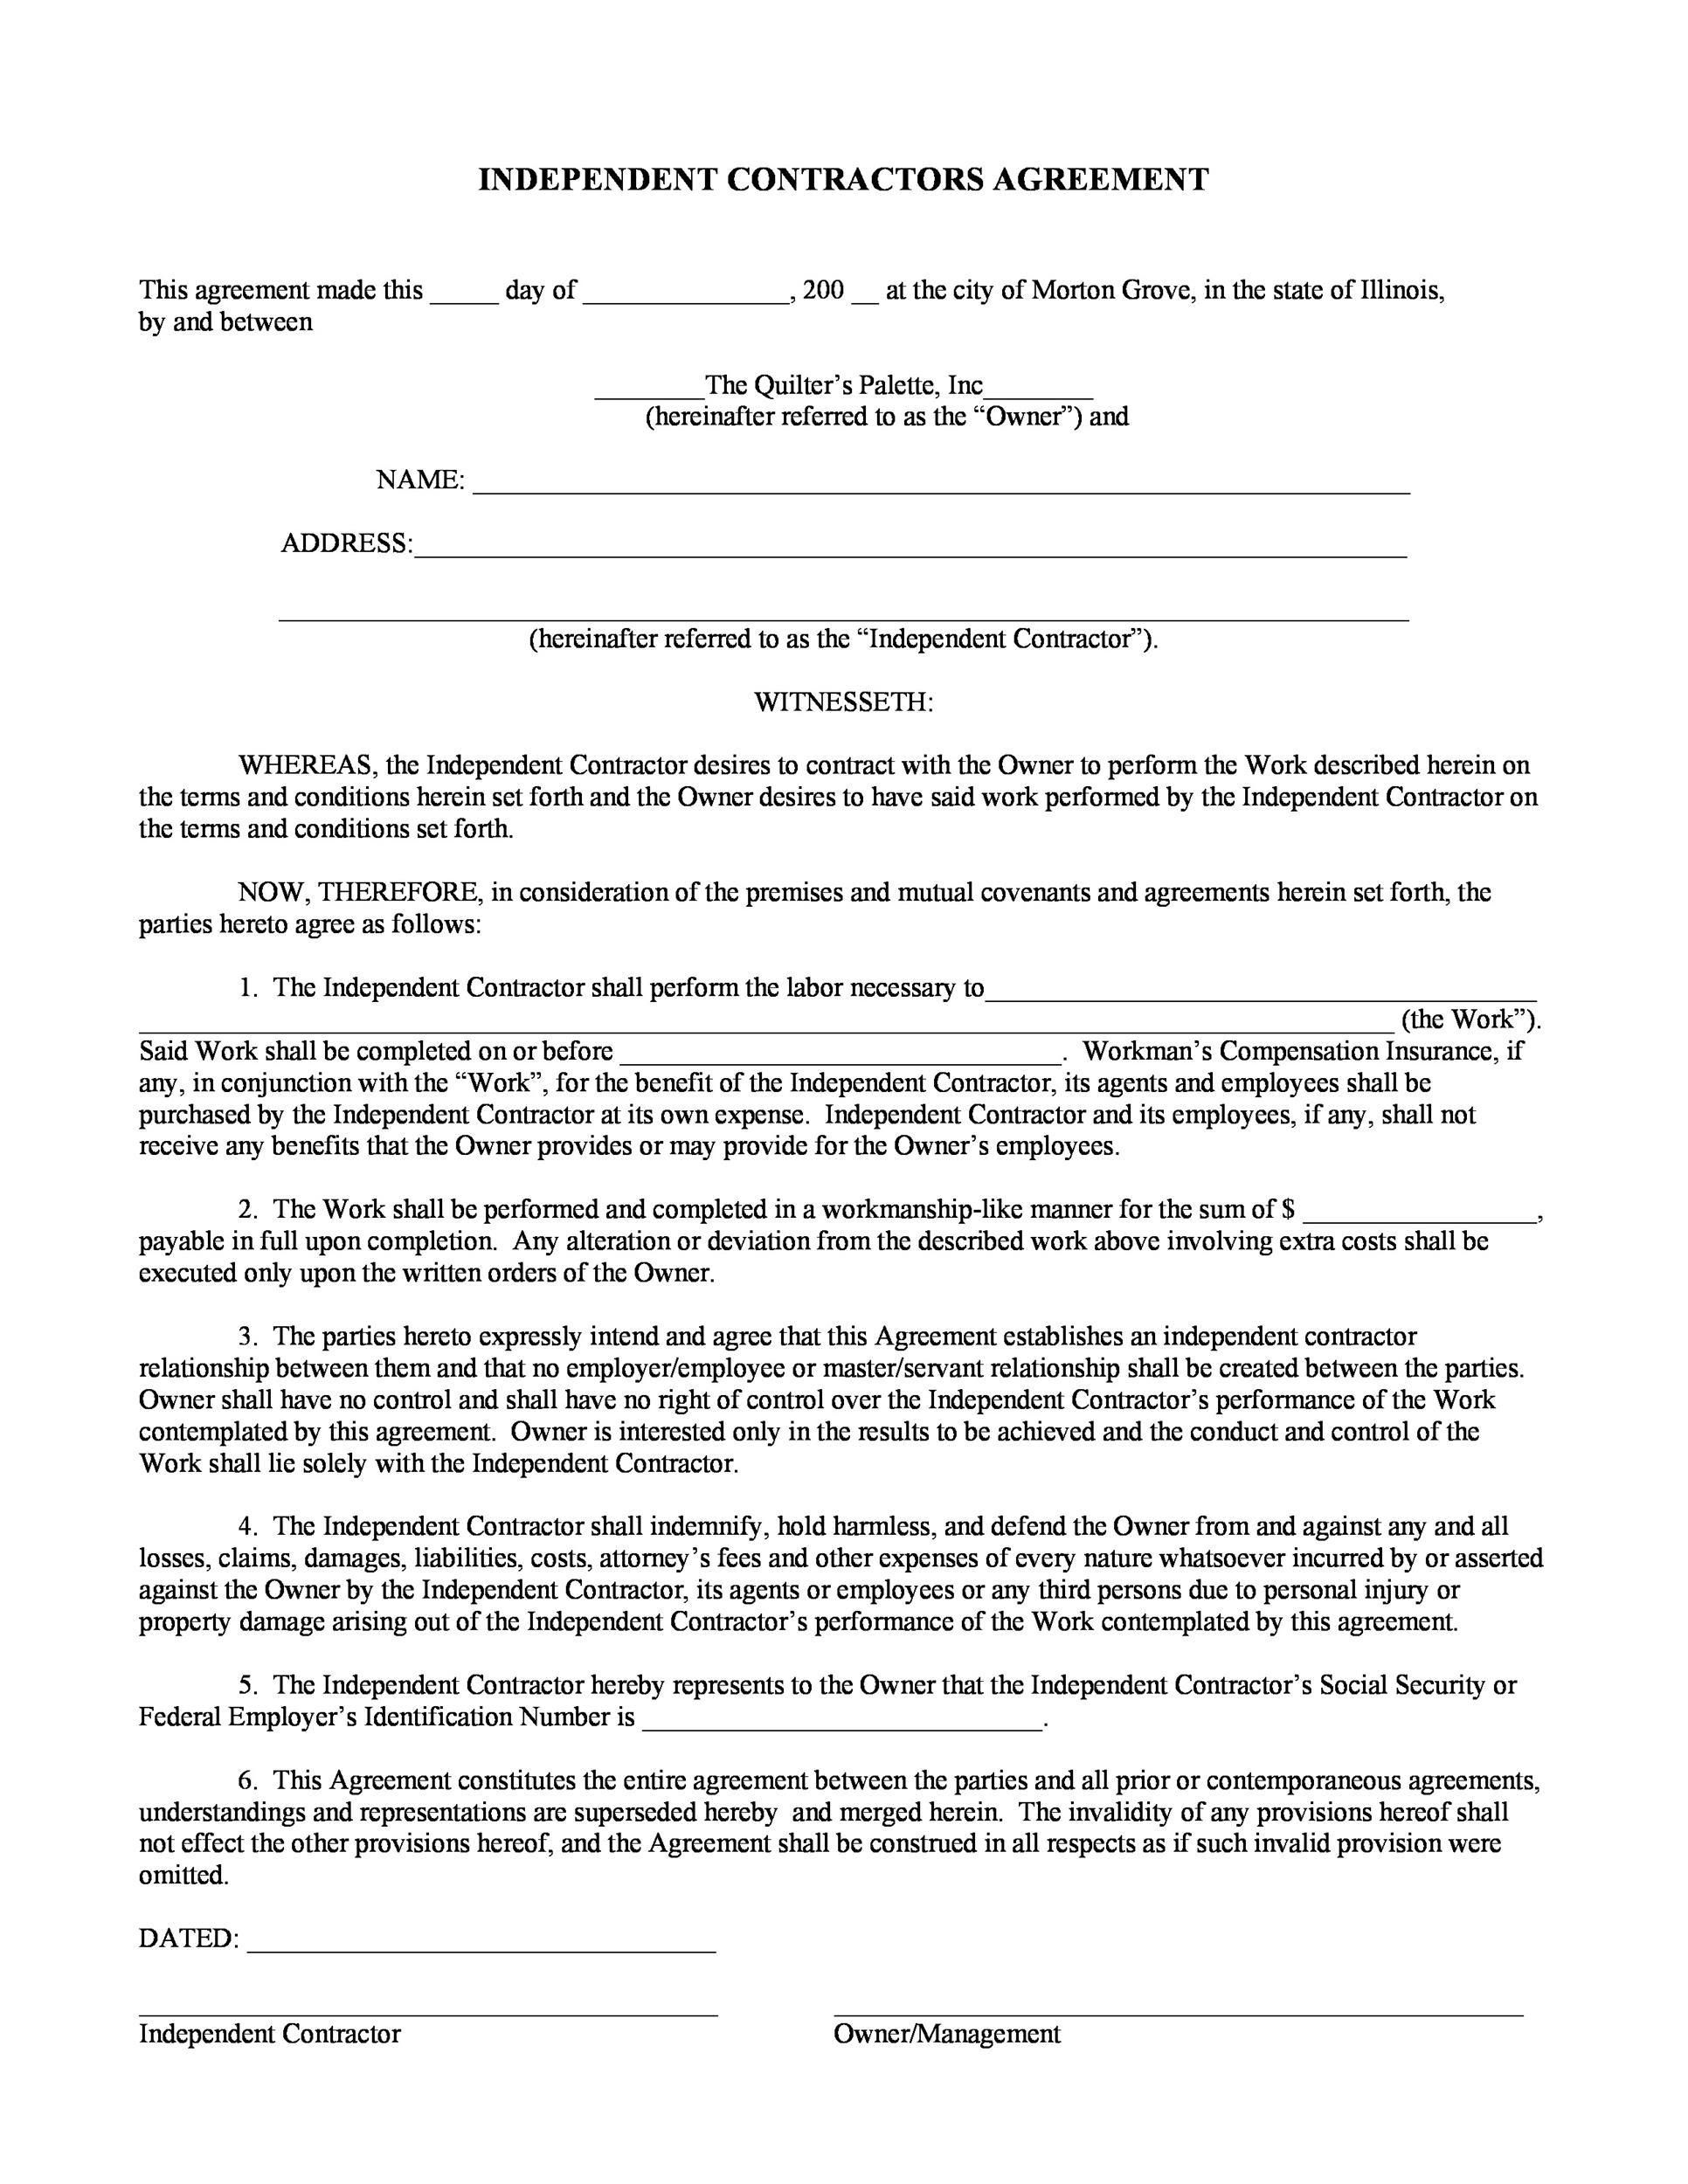 Free independent contractor agreement 26